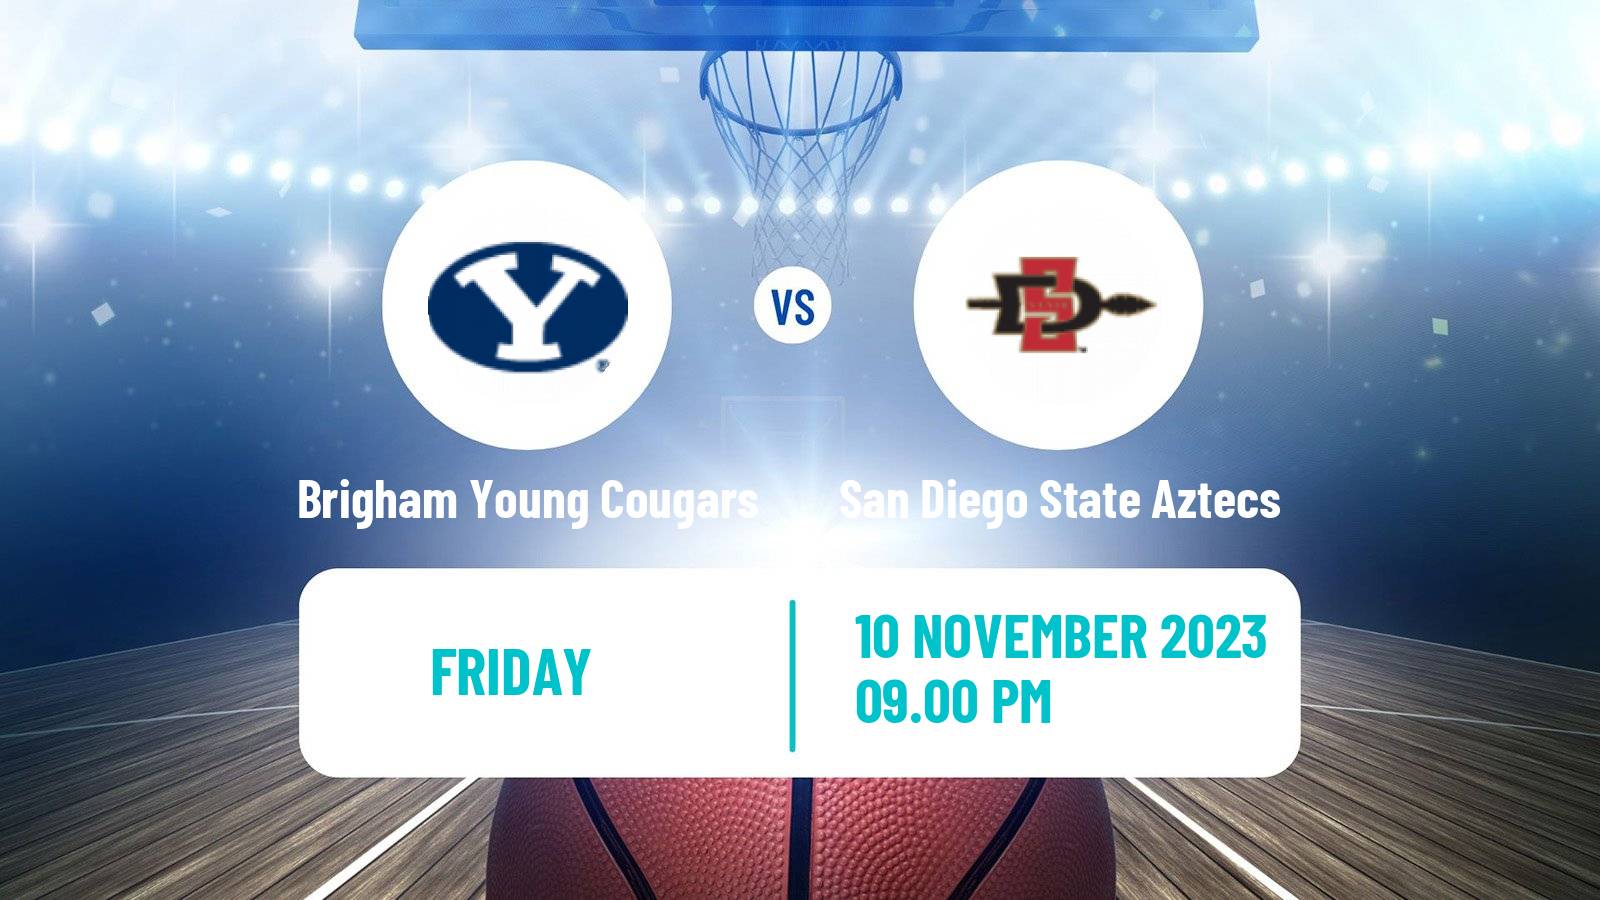 Basketball NCAA College Basketball Brigham Young Cougars - San Diego State Aztecs